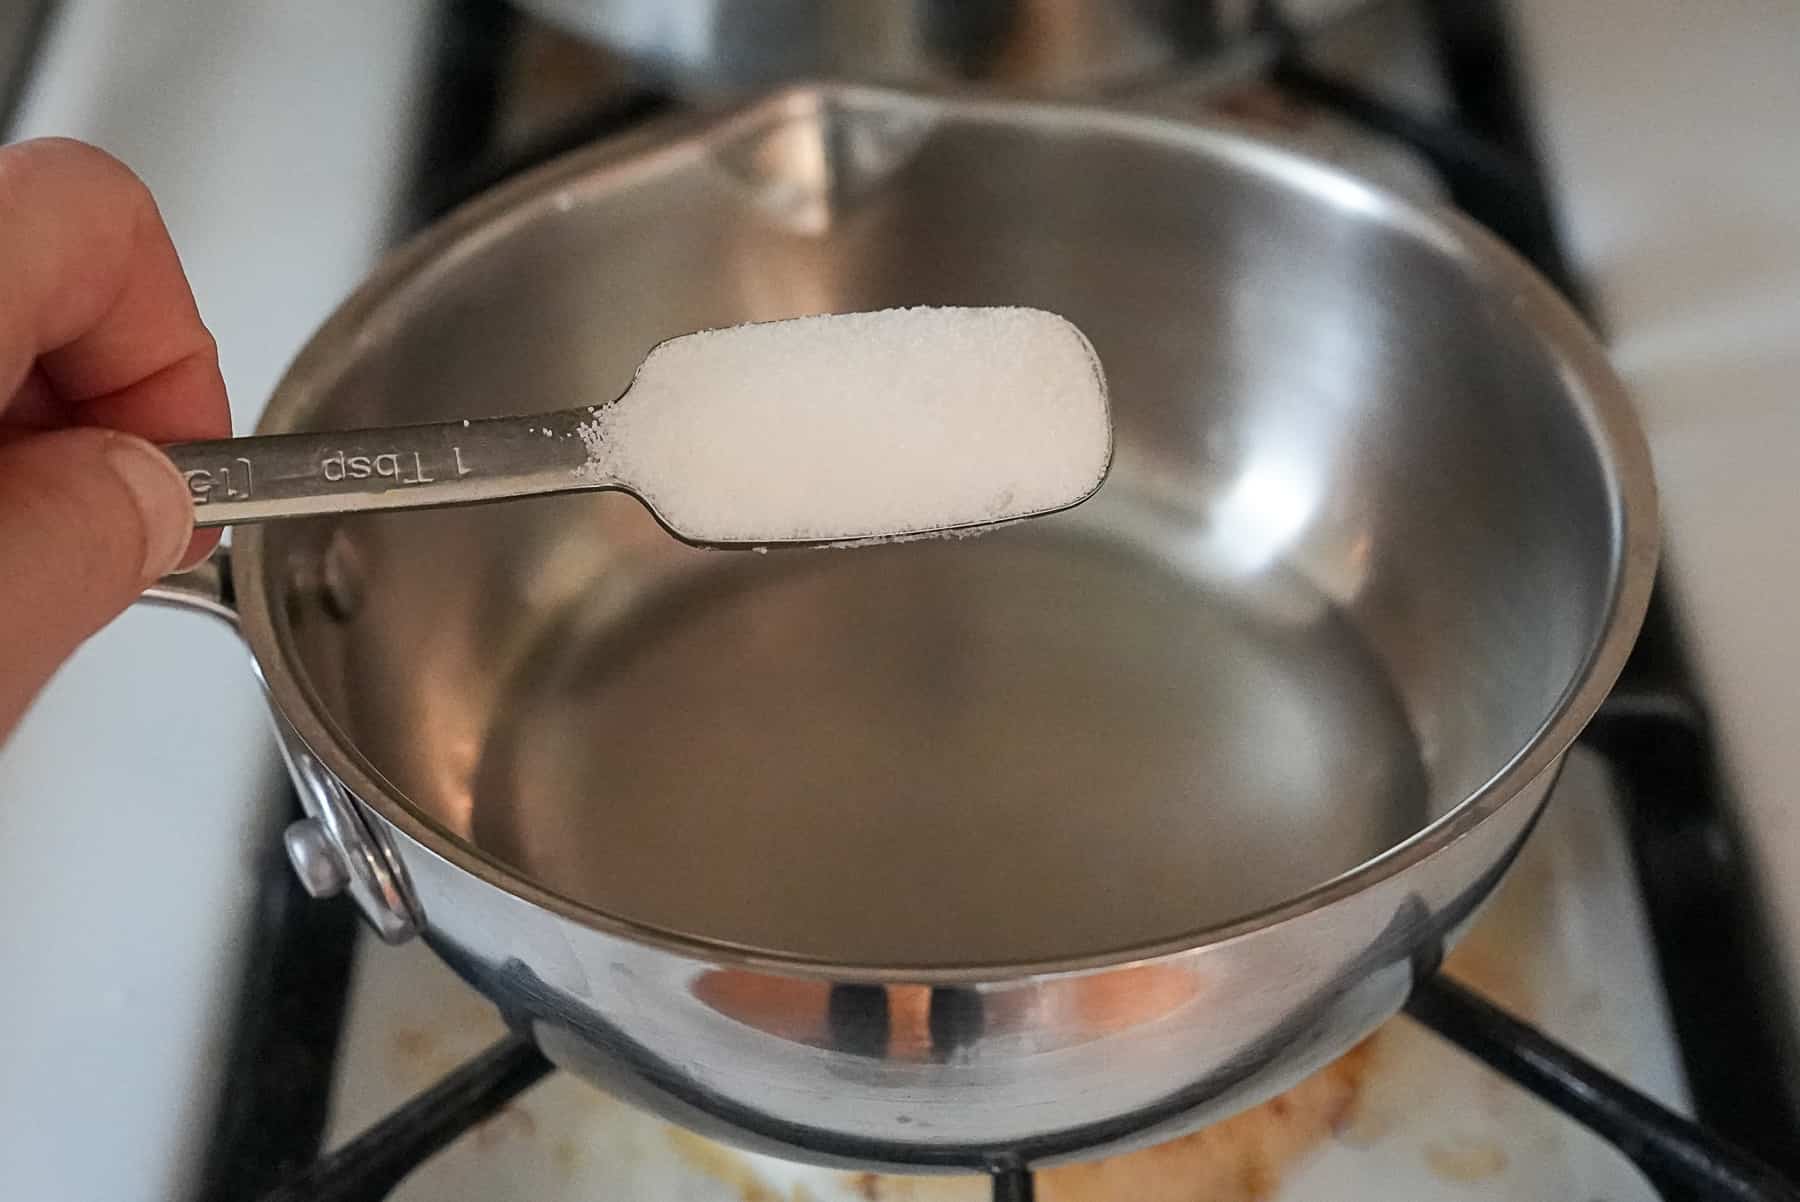 Add the sugar to the water and vinegar